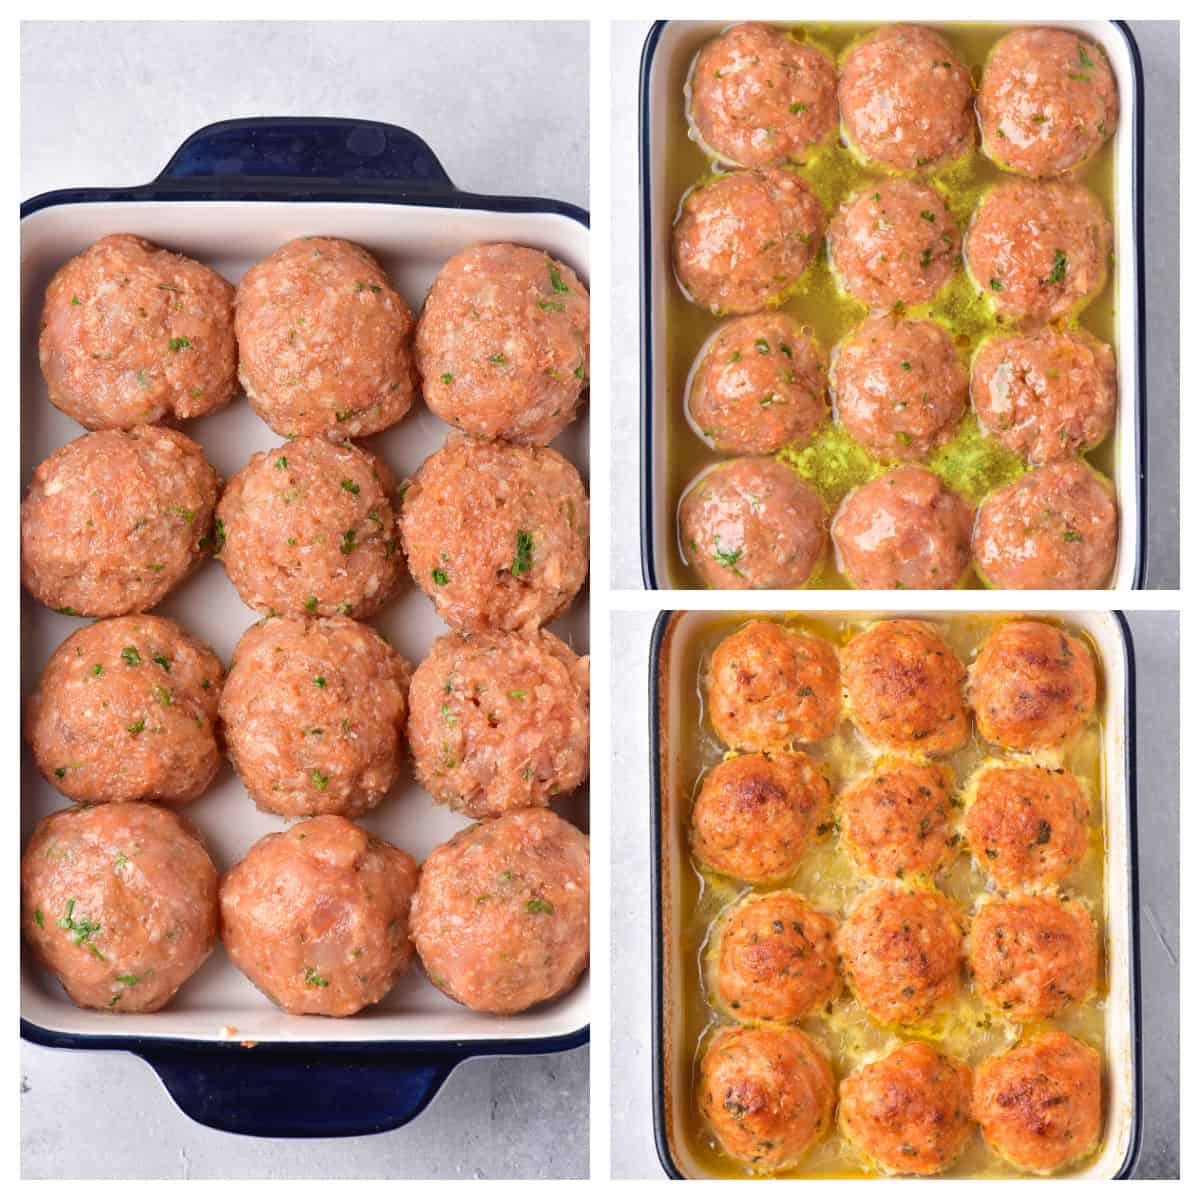 Collage with stages of baked chicken meatballs.